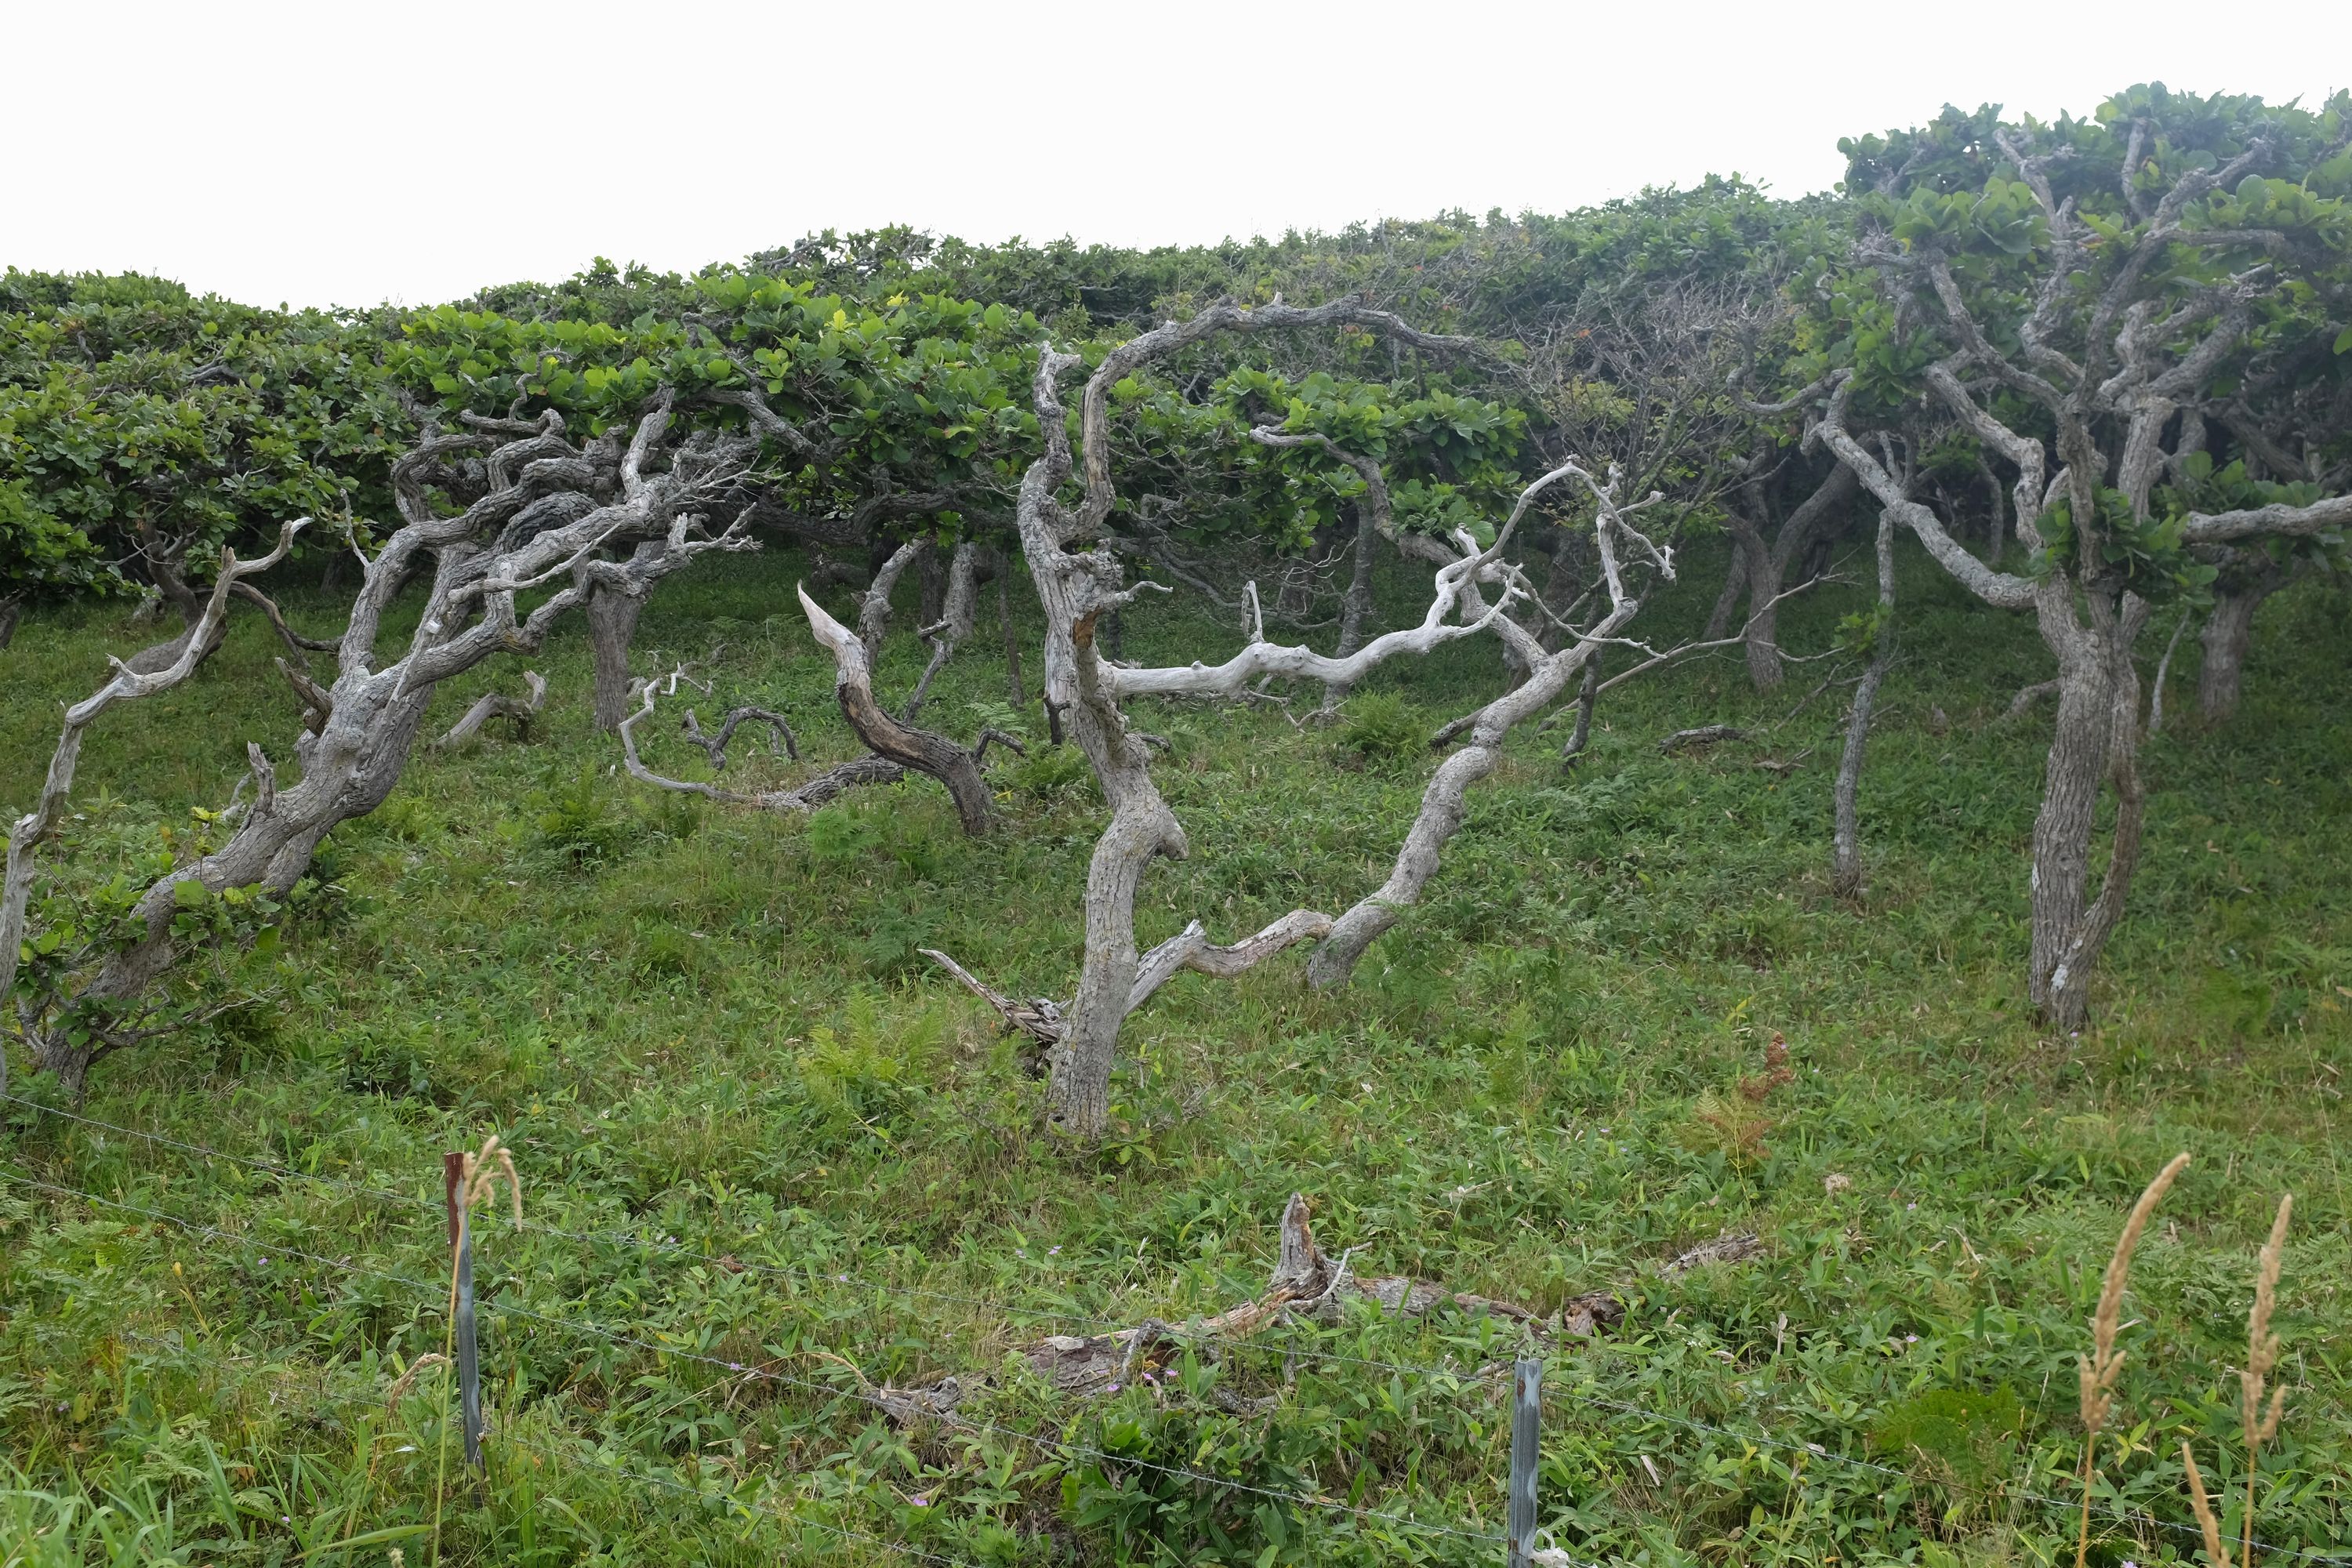 A growth of trees whose trunks are all bent by the constant wind.